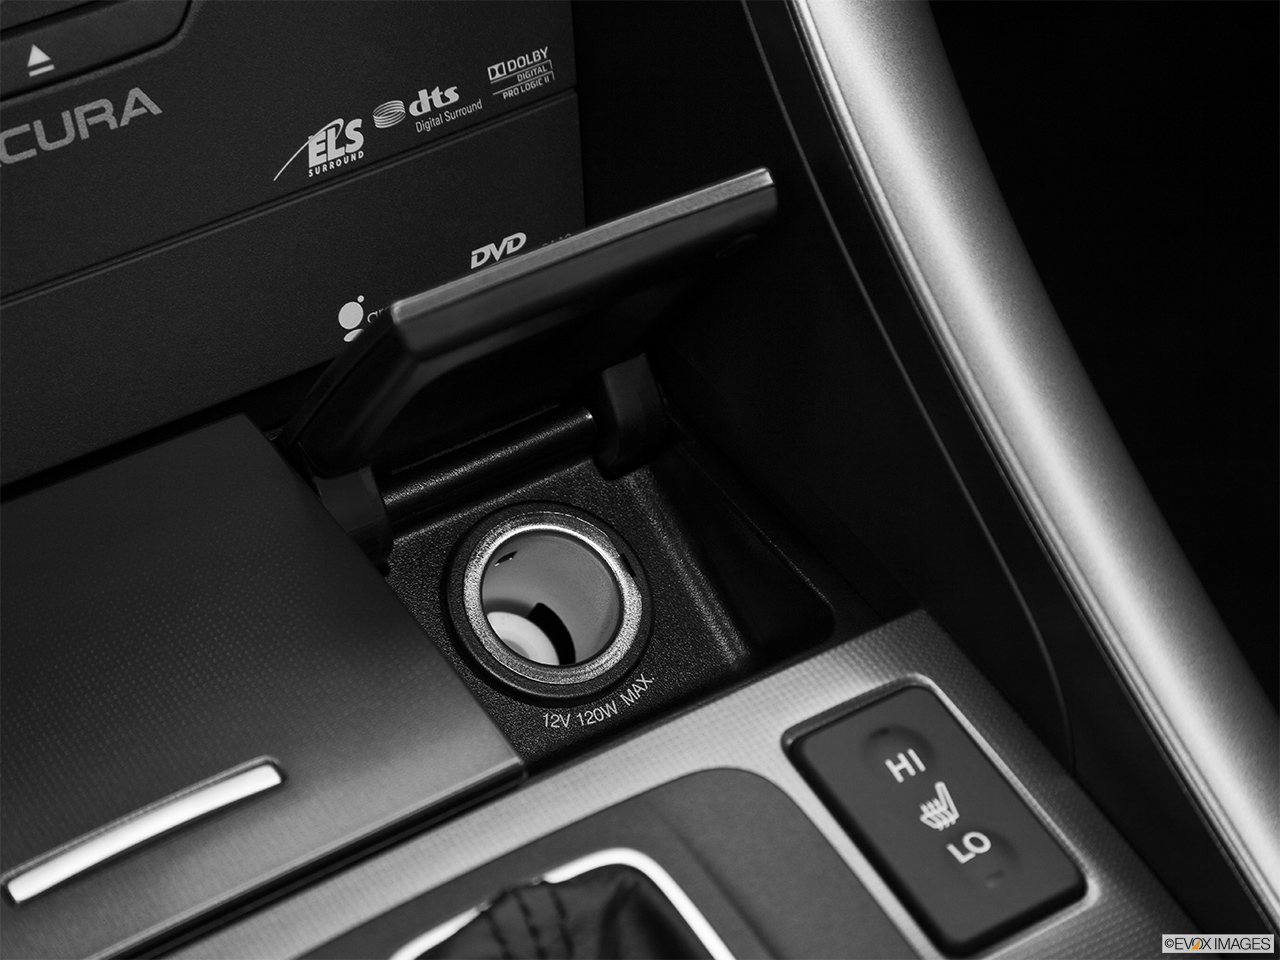 2013 Acura TSX 5-Speed Automatic Main power point. 